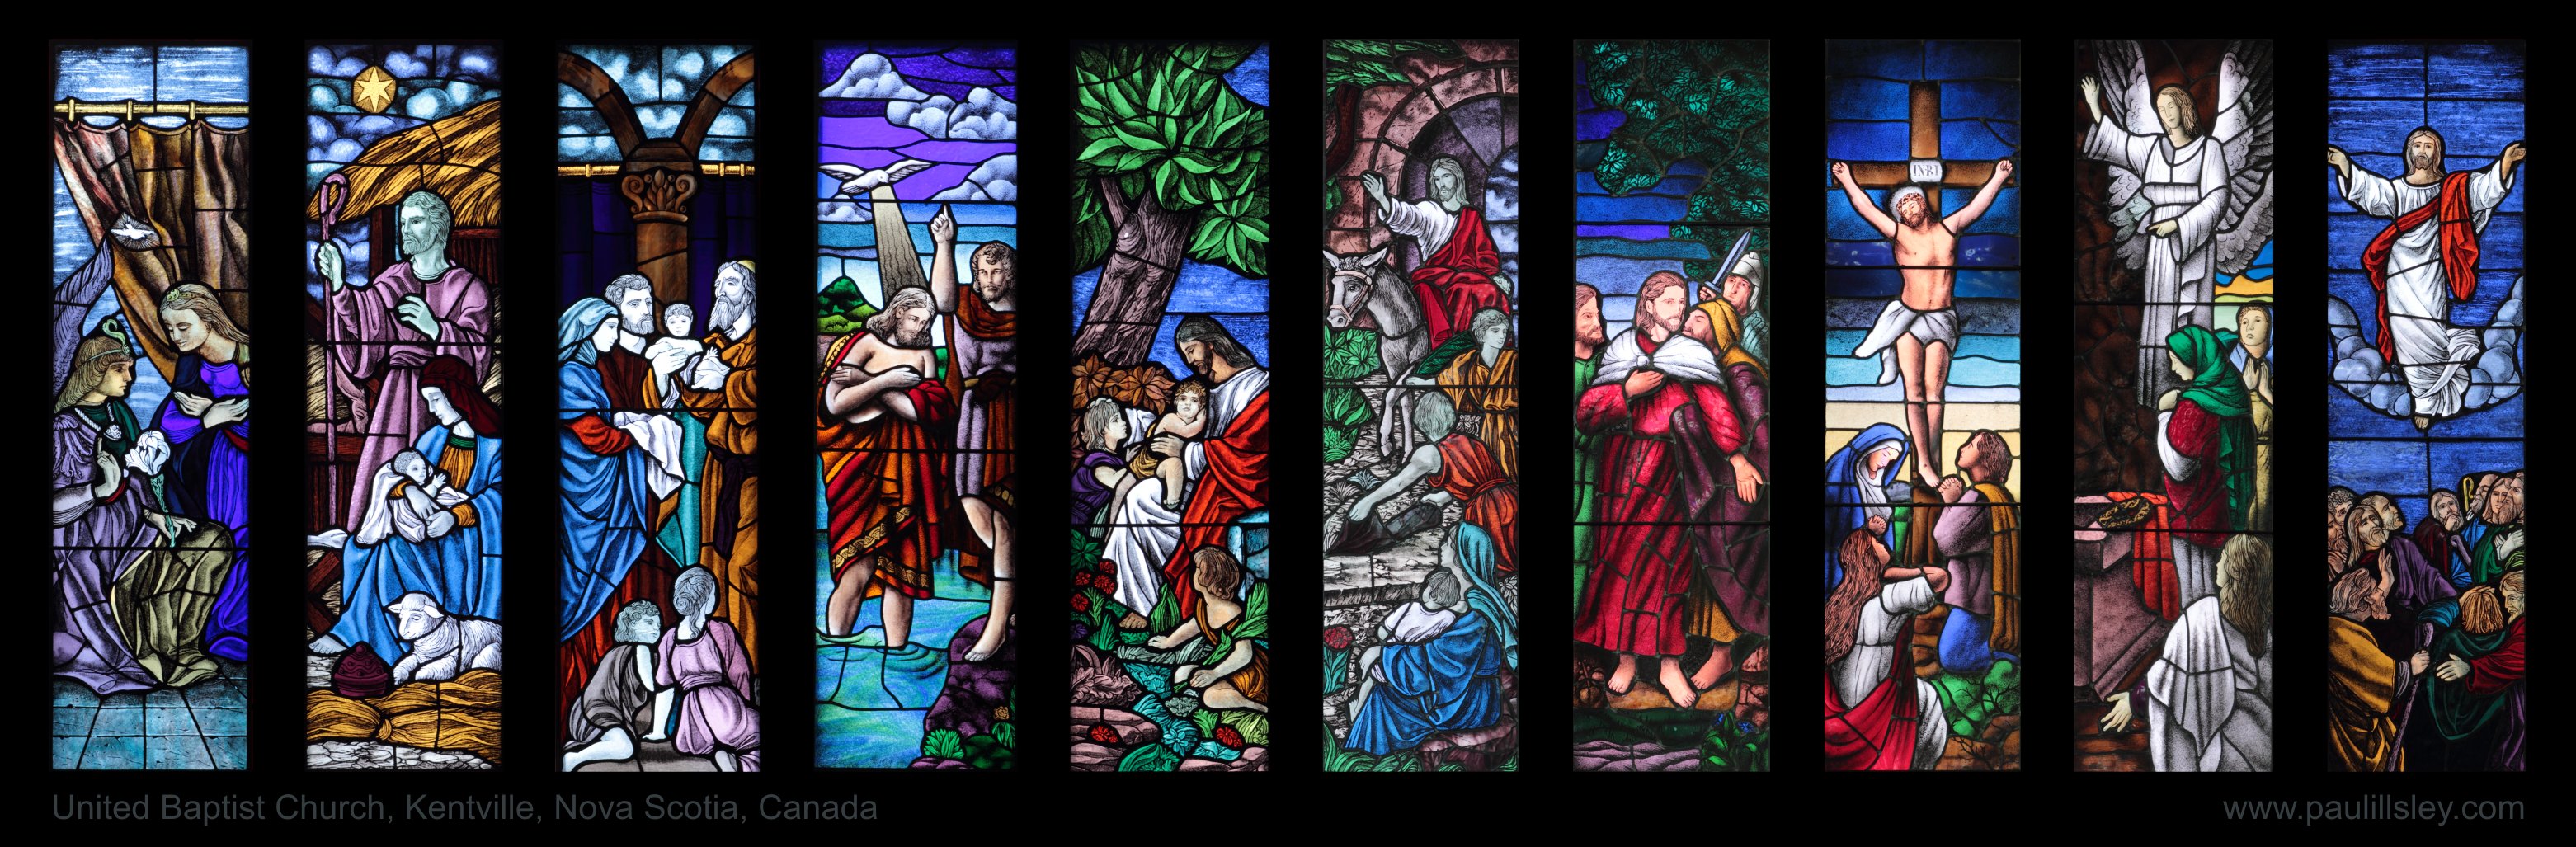 Stained glass art window religion r wallpaper | 3123x1027 | 182568 ...